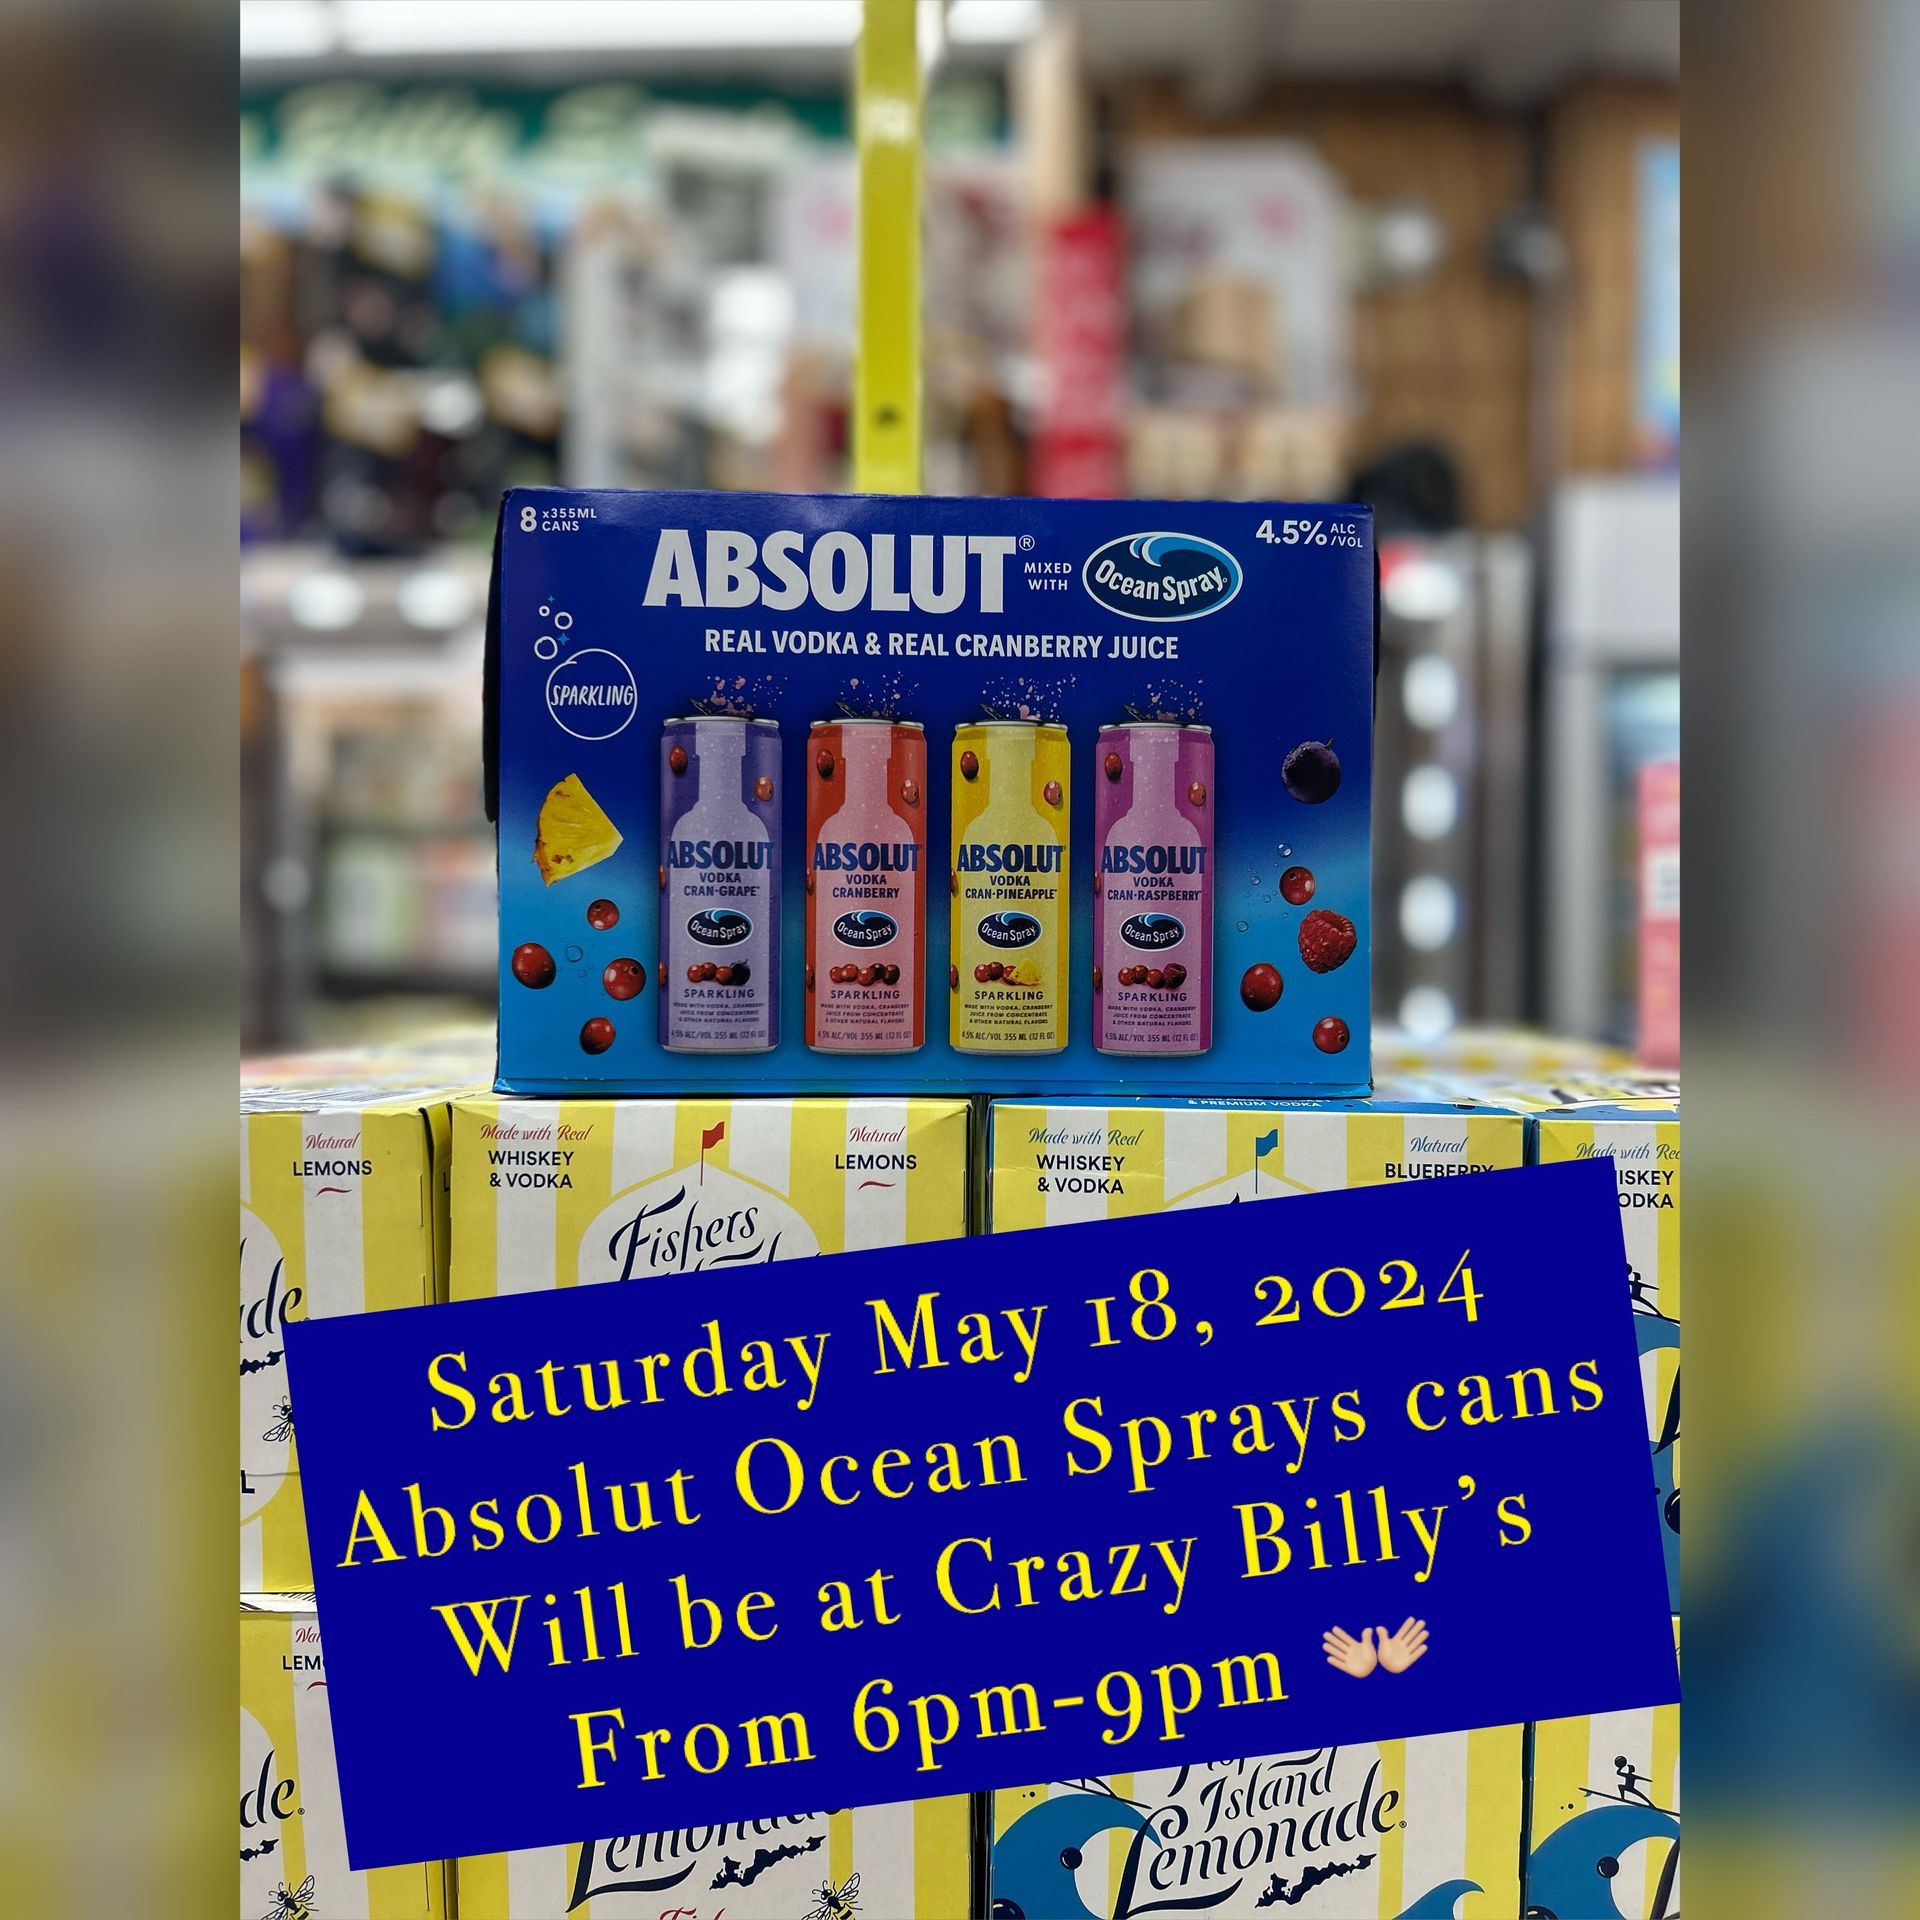 Saturday may 18 2024 absolut ocean sprays cans will be at crazy billy 's from 6 pm-9pm